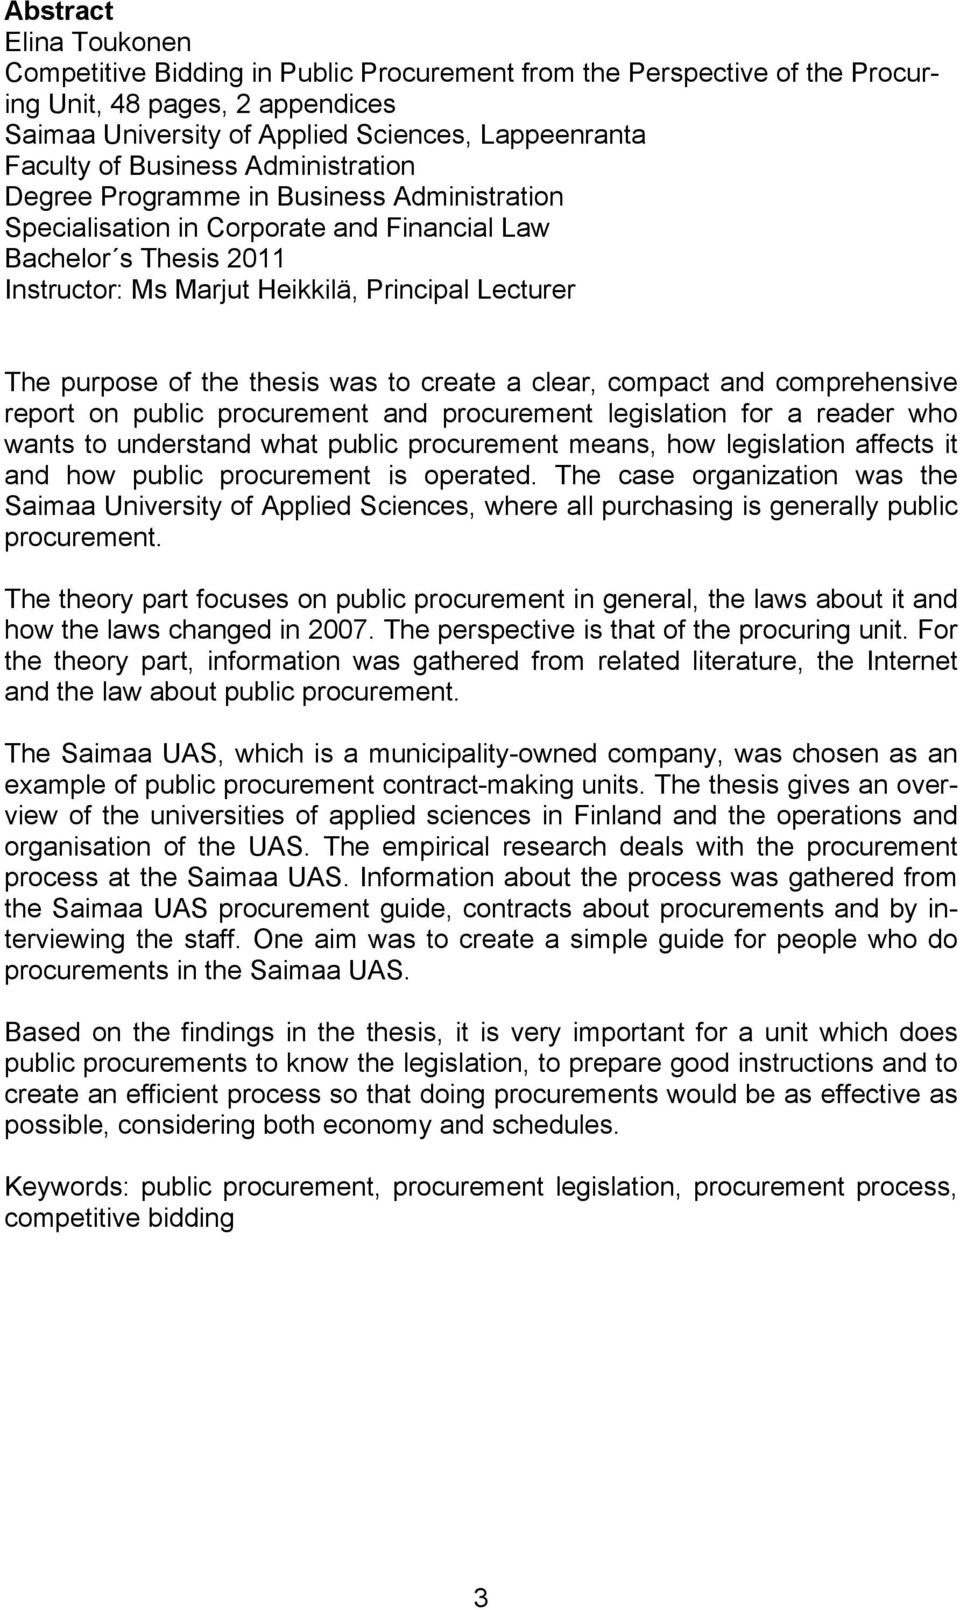 of the thesis was to create a clear, compact and comprehensive report on public procurement and procurement legislation for a reader who wants to understand what public procurement means, how